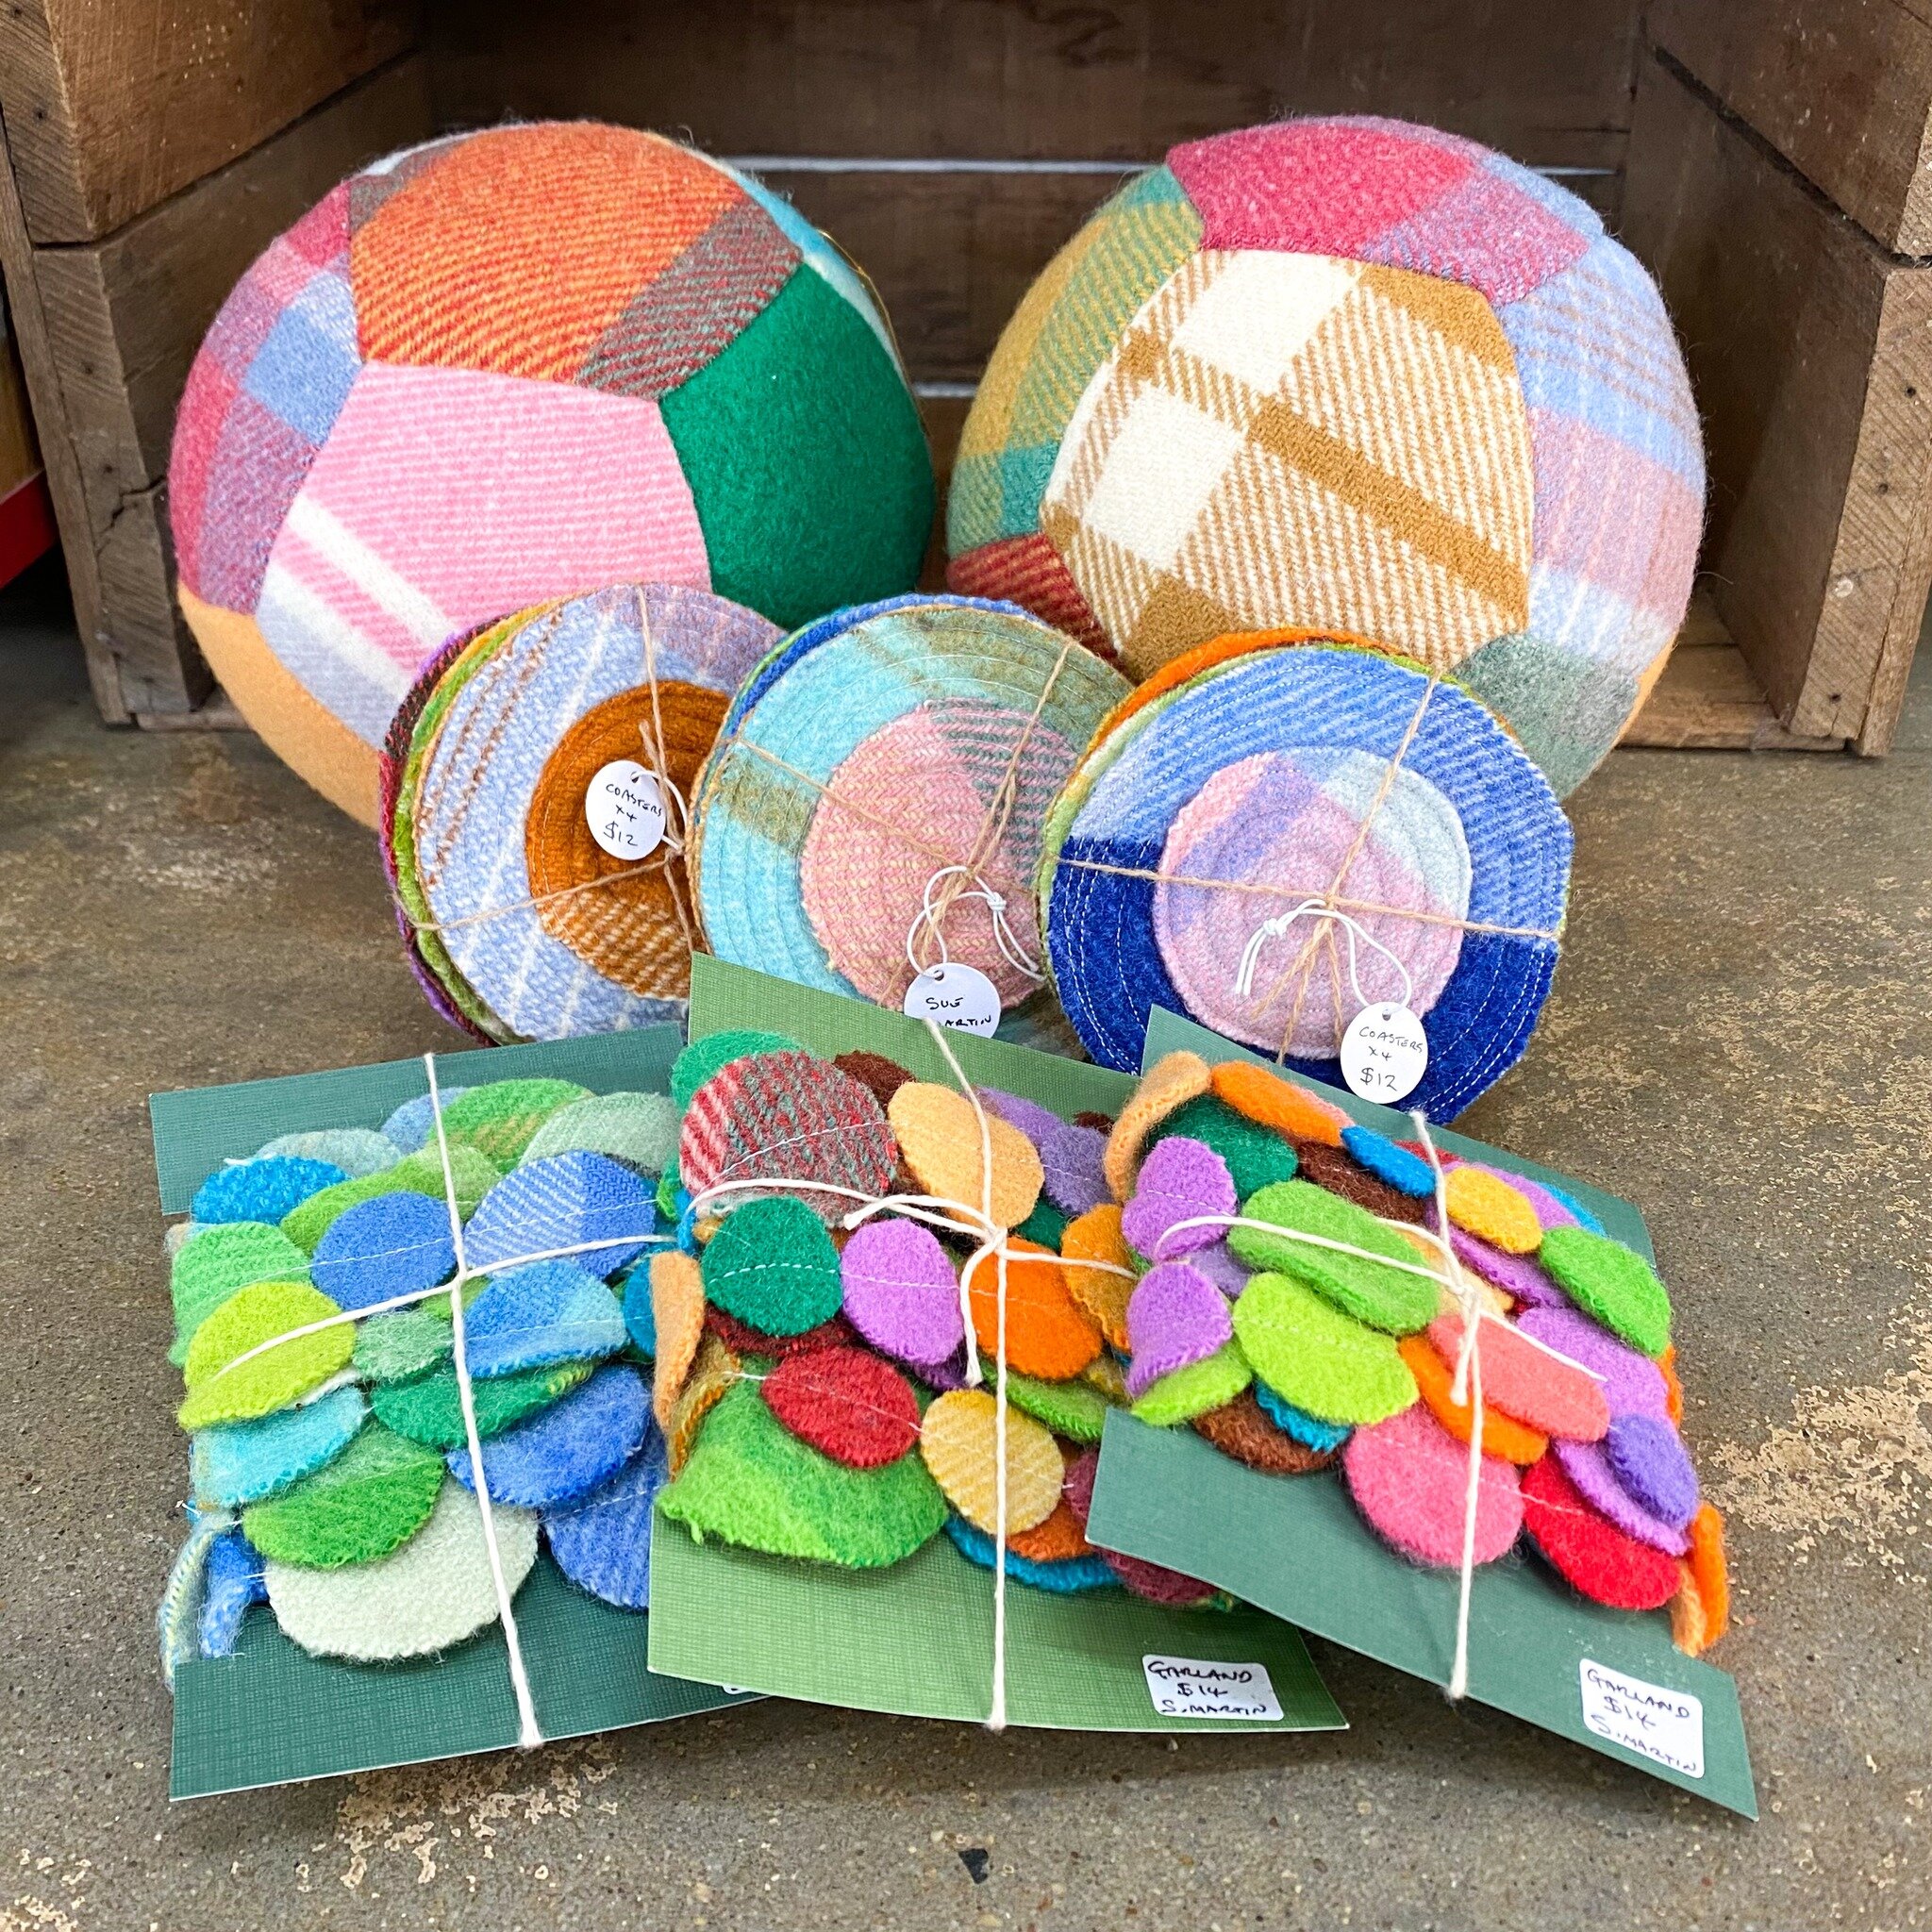 Here&rsquo;s a little bit of colour on a grey day!
A lovely colourful delivery of balls, coasters, heat packs and garlands from @suzannemartin 😍
We love that they&rsquo;re made from repurposed Australian woollen blankets ❤️

#freshstock #foundrybair